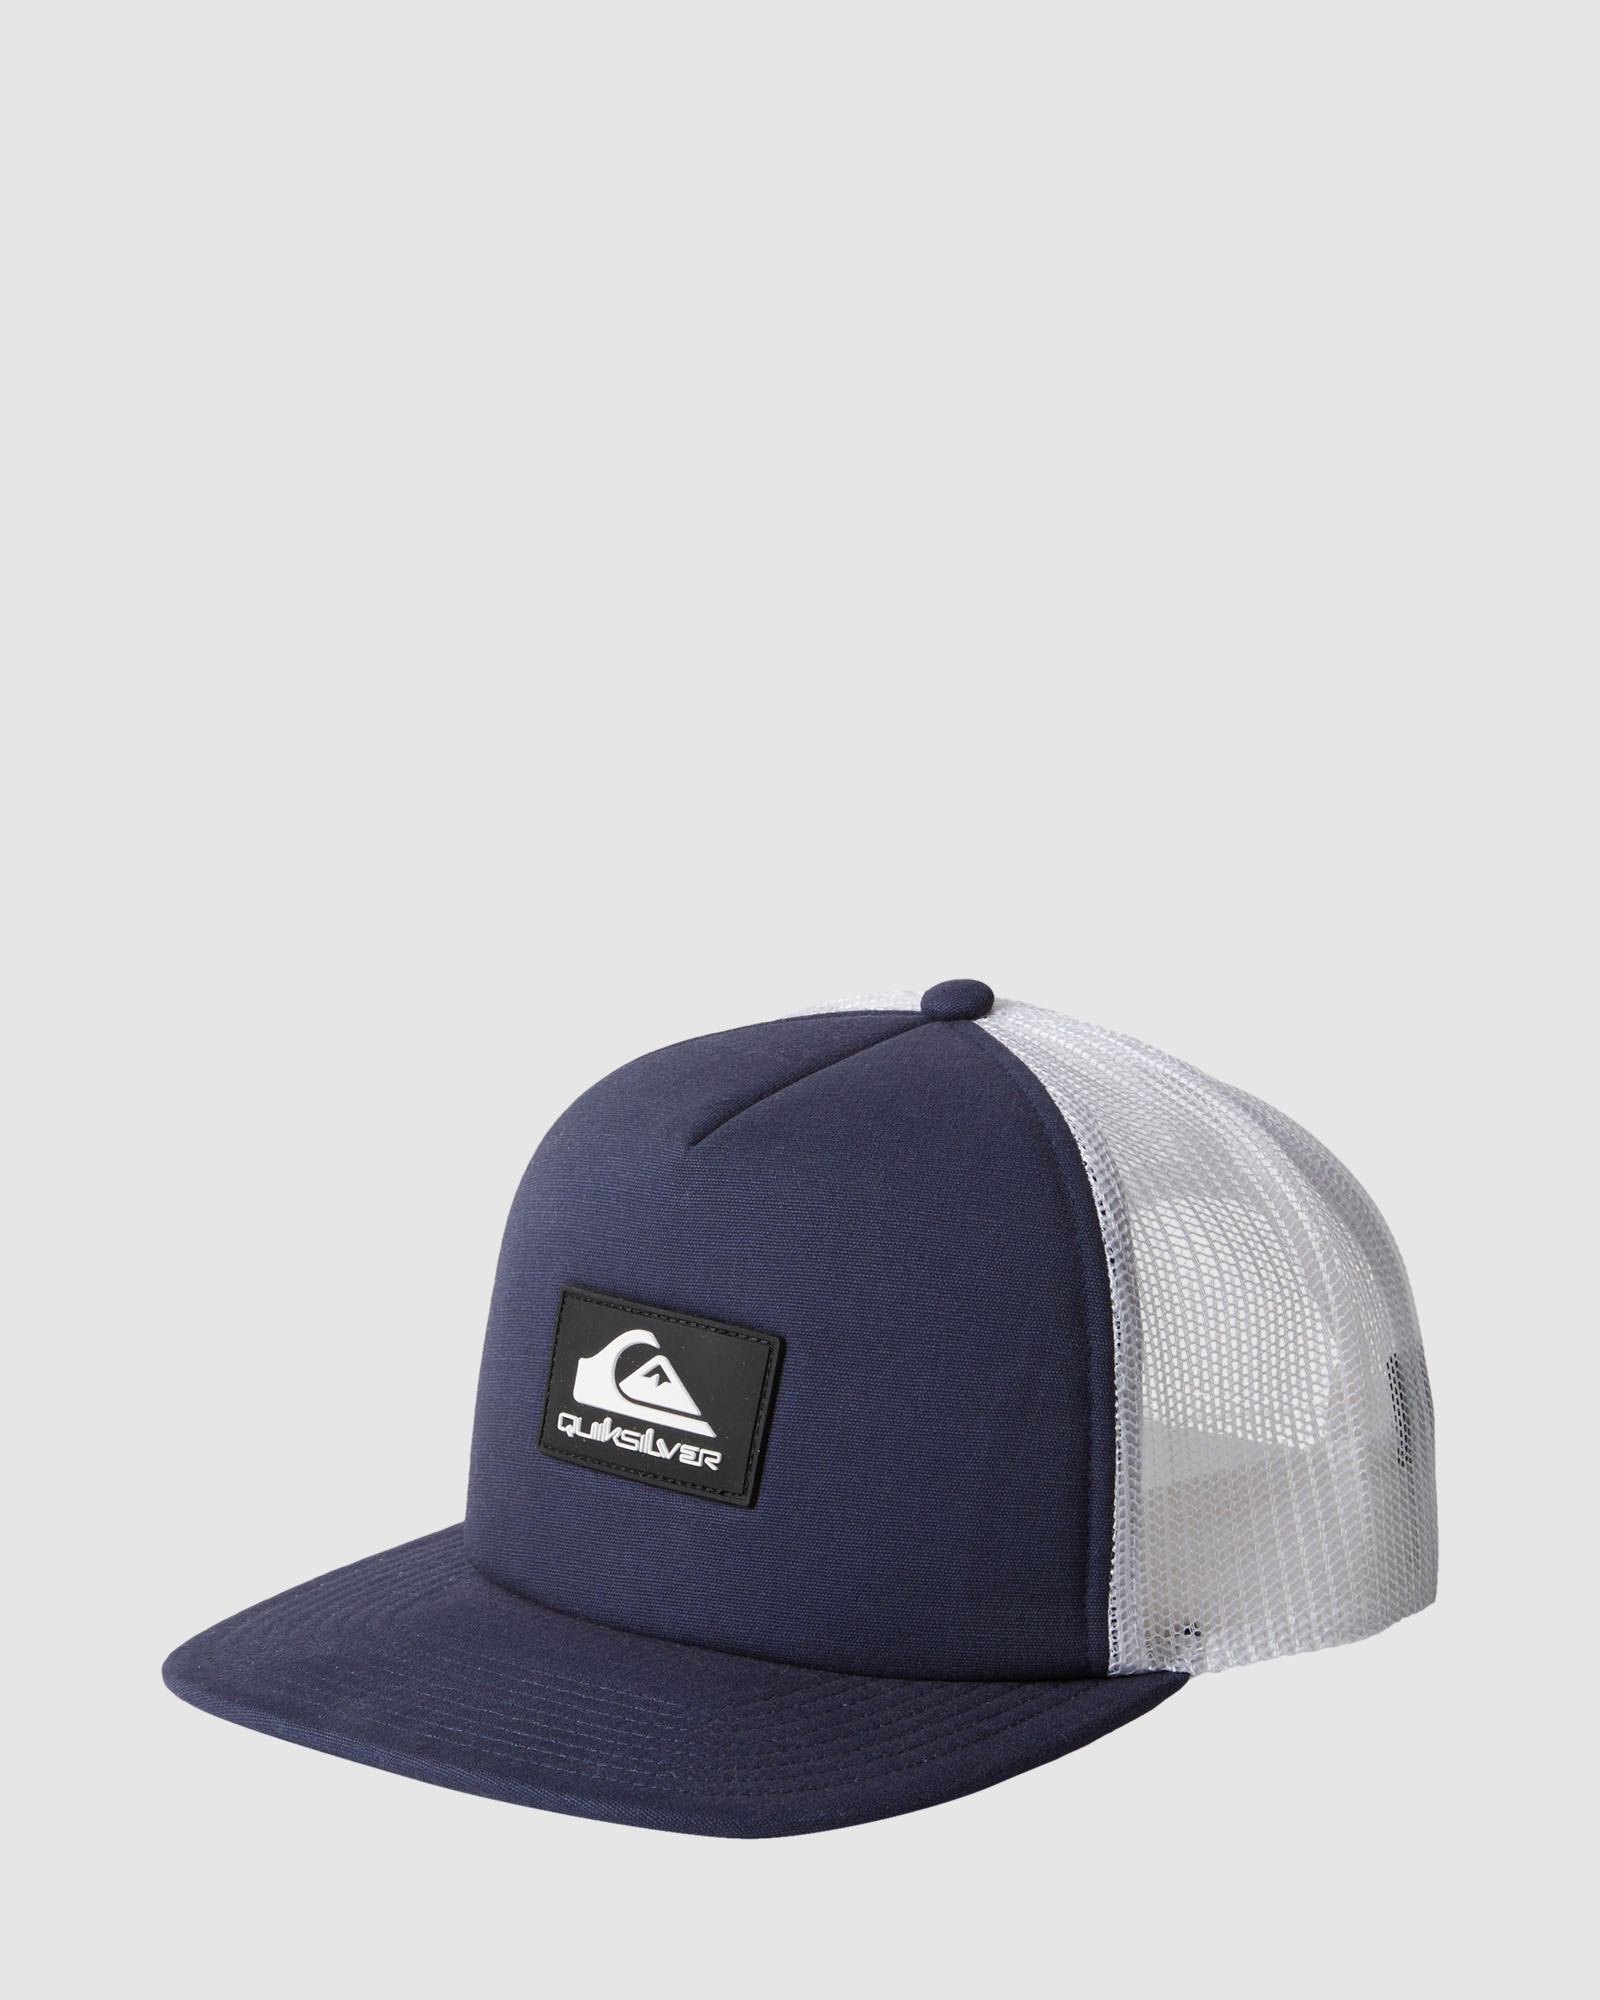 Quiksilver Omnipotent Snapback Hat - Crown Blue | SurfStitch